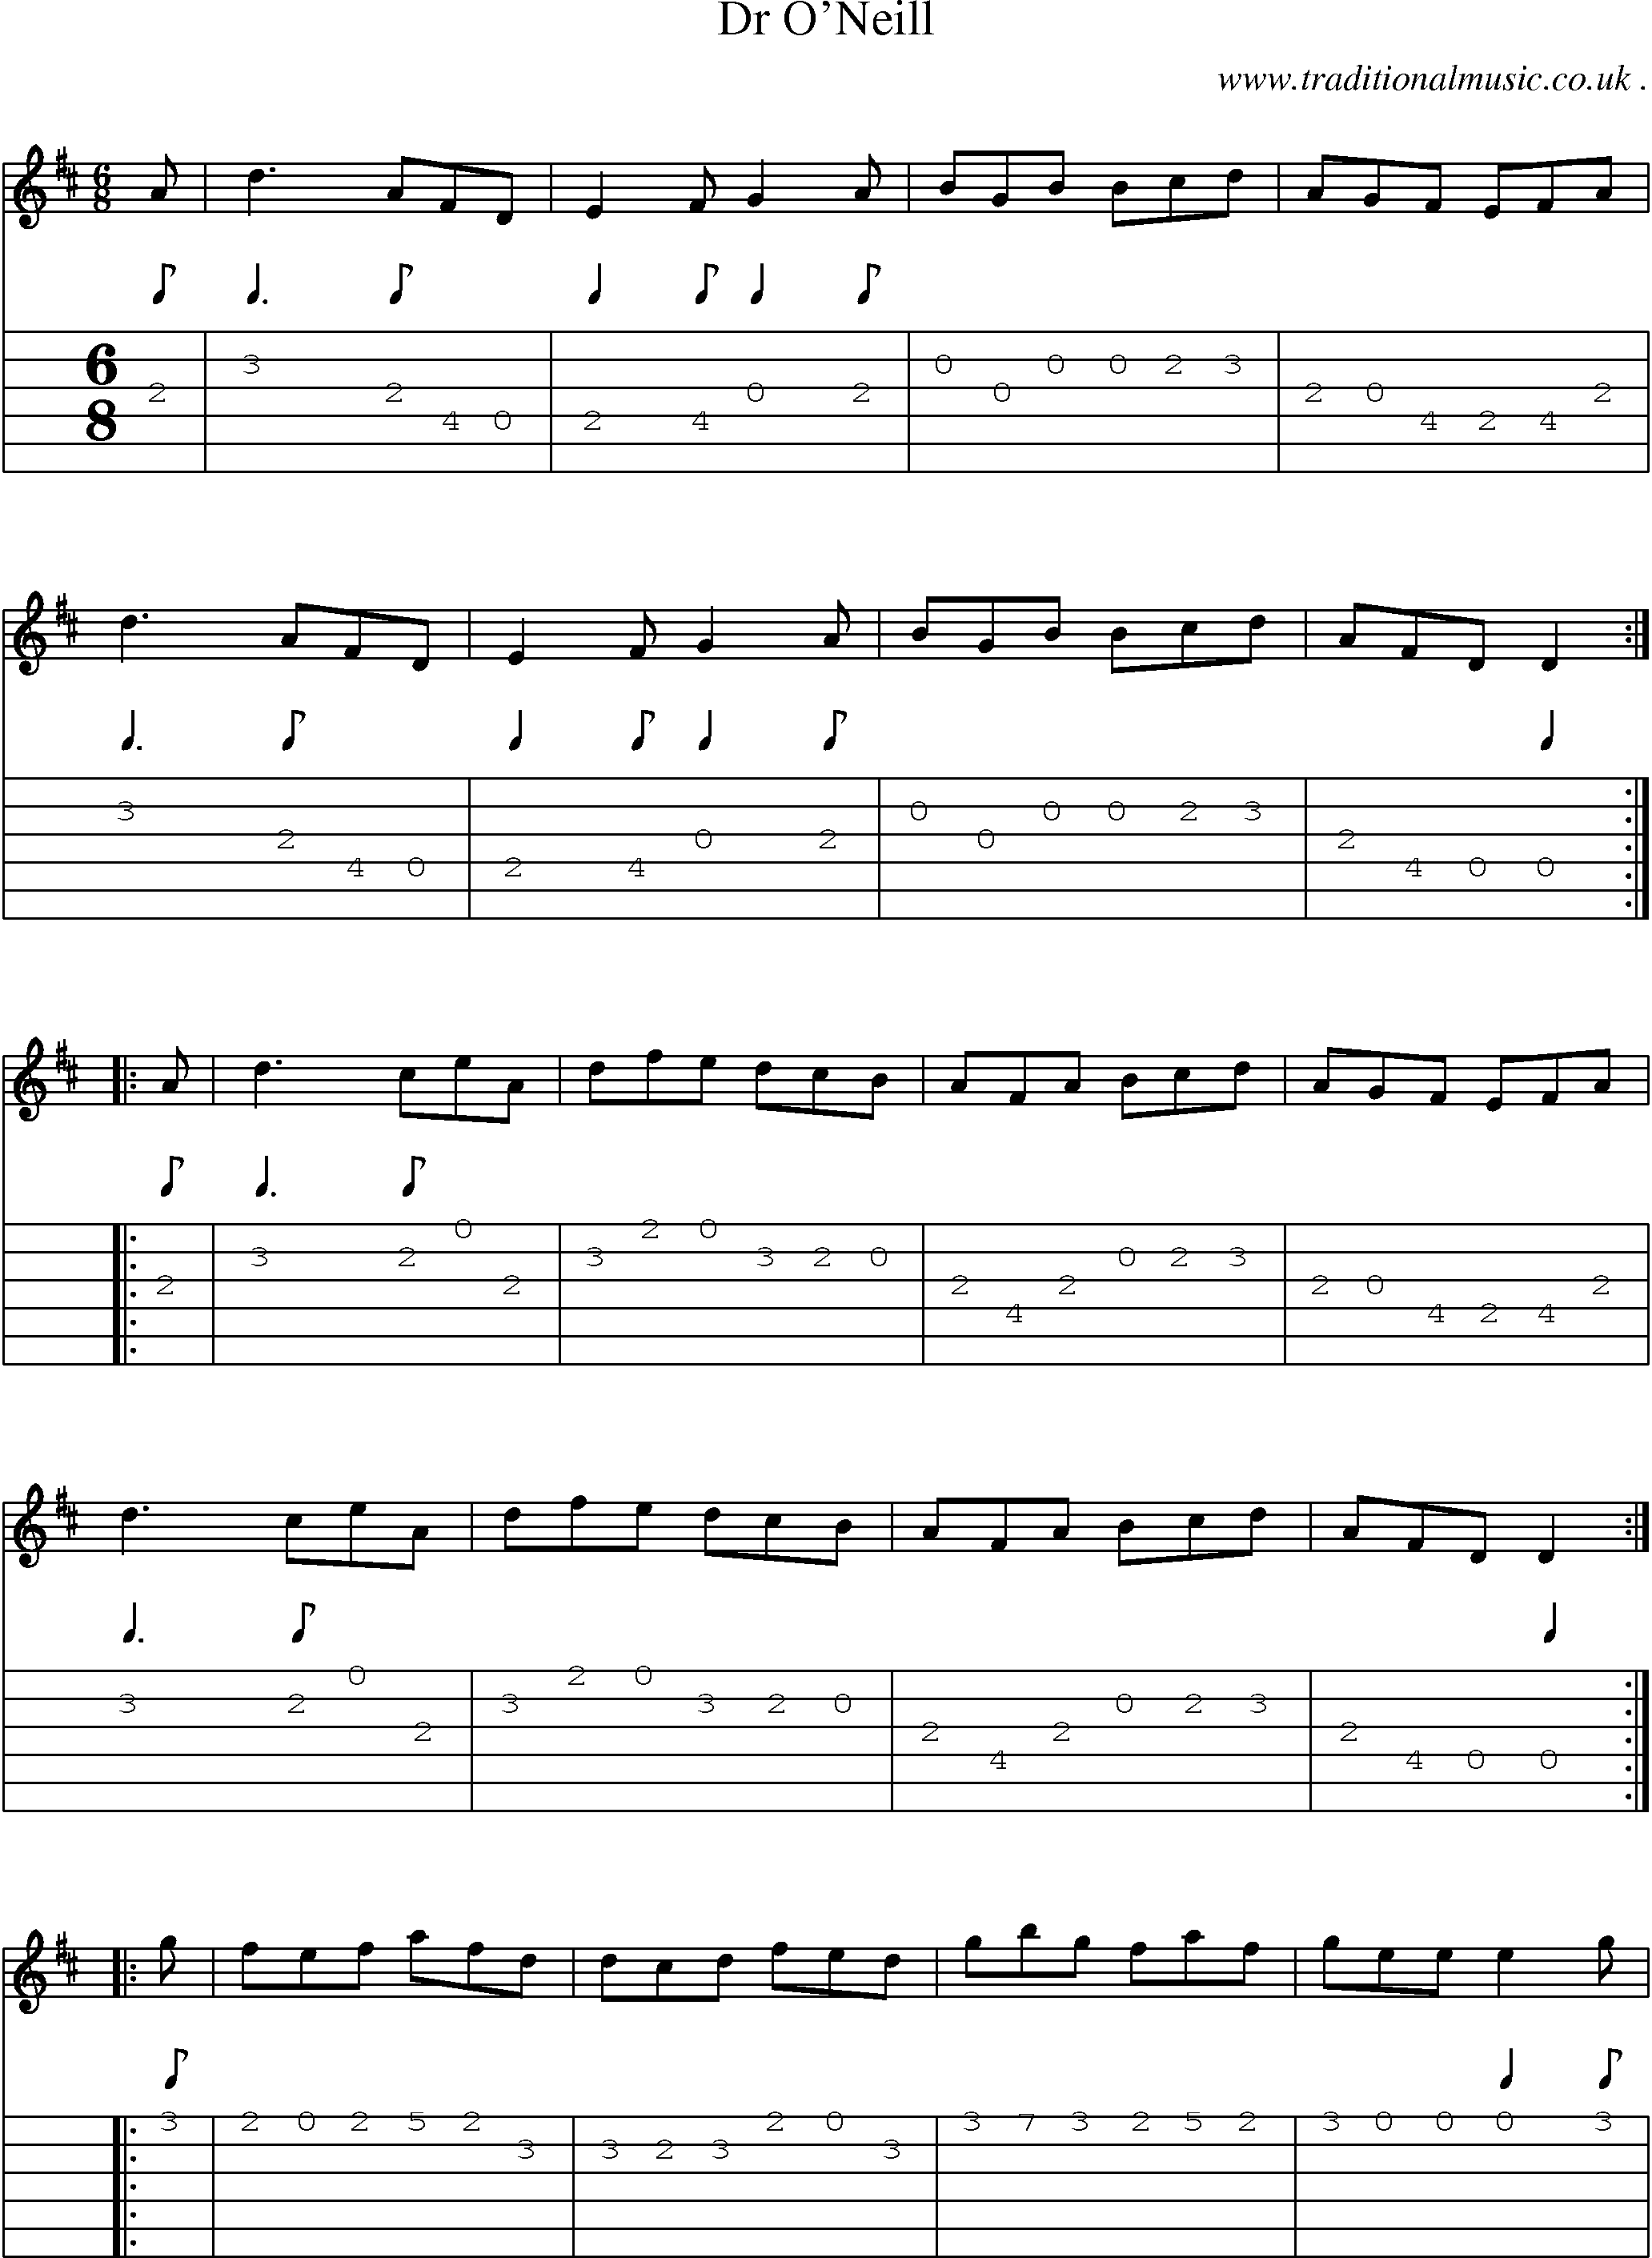 Sheet-Music and Guitar Tabs for Dr Oneill